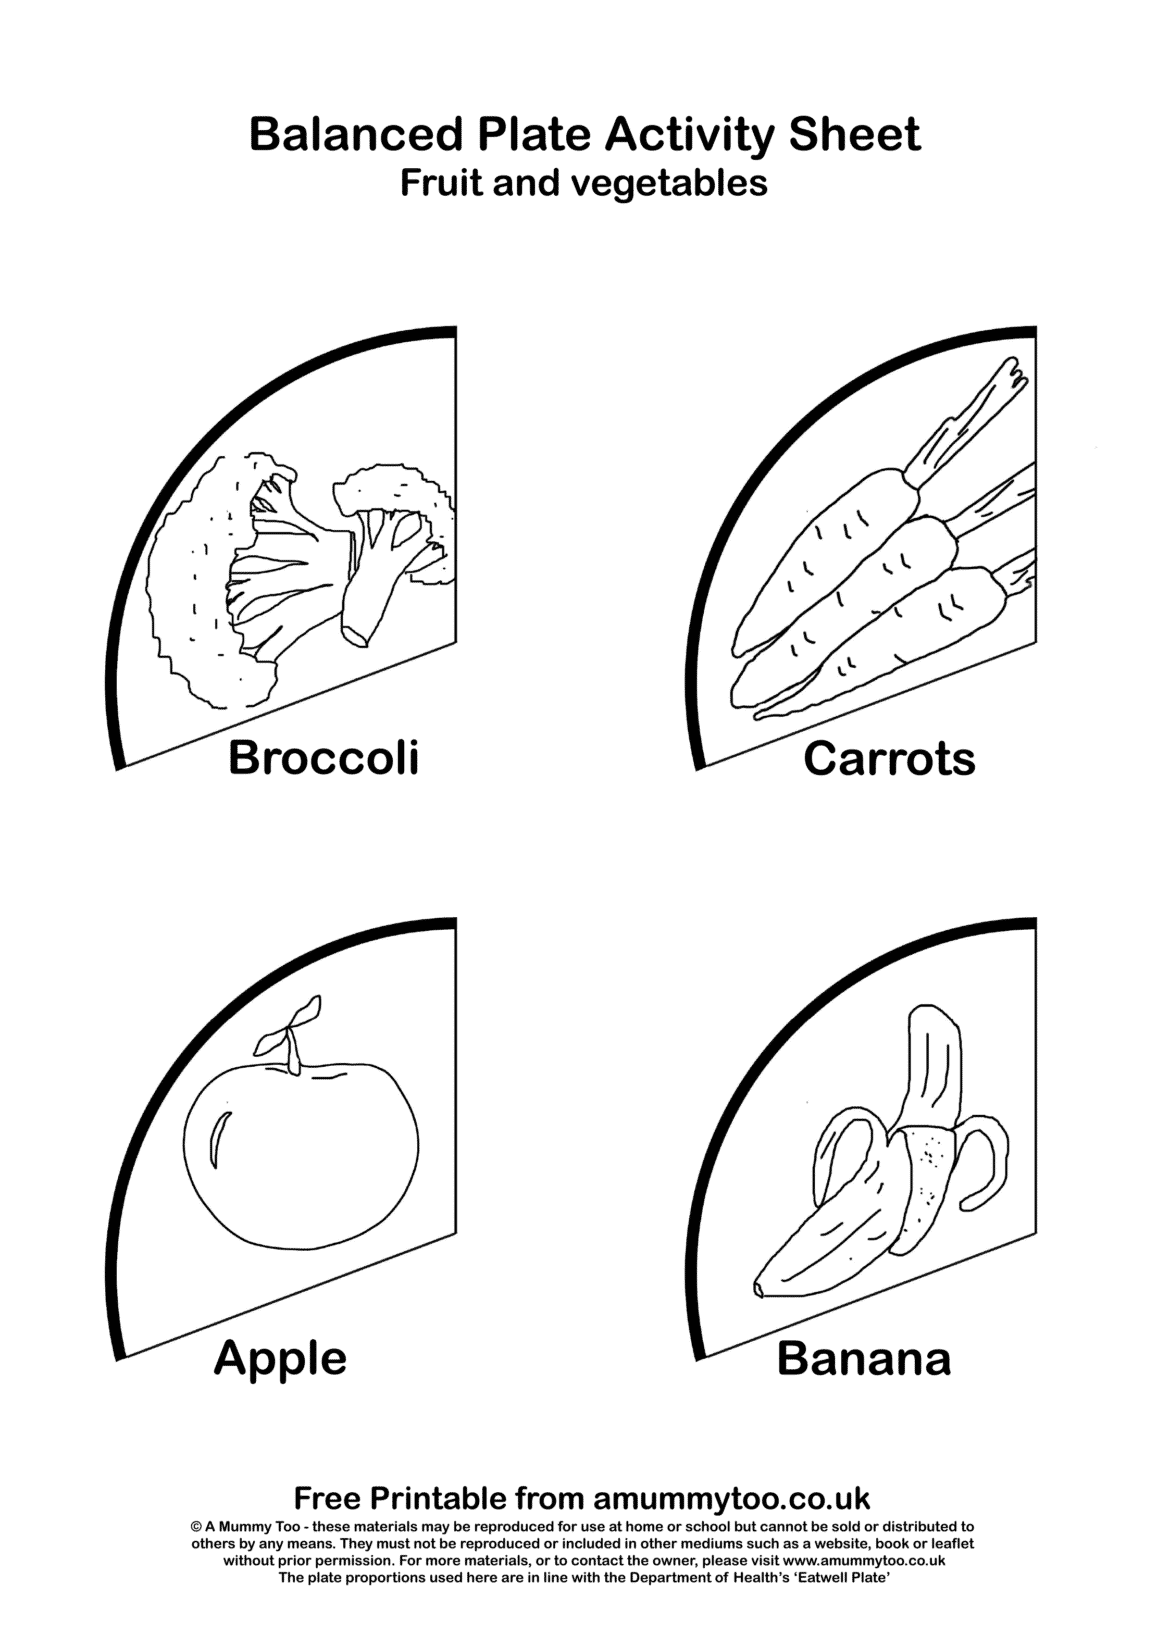 Printable balanced plate activity sheet demonstrating fruits and vegetables that can be placed on a plate as part of a balanced diet. 